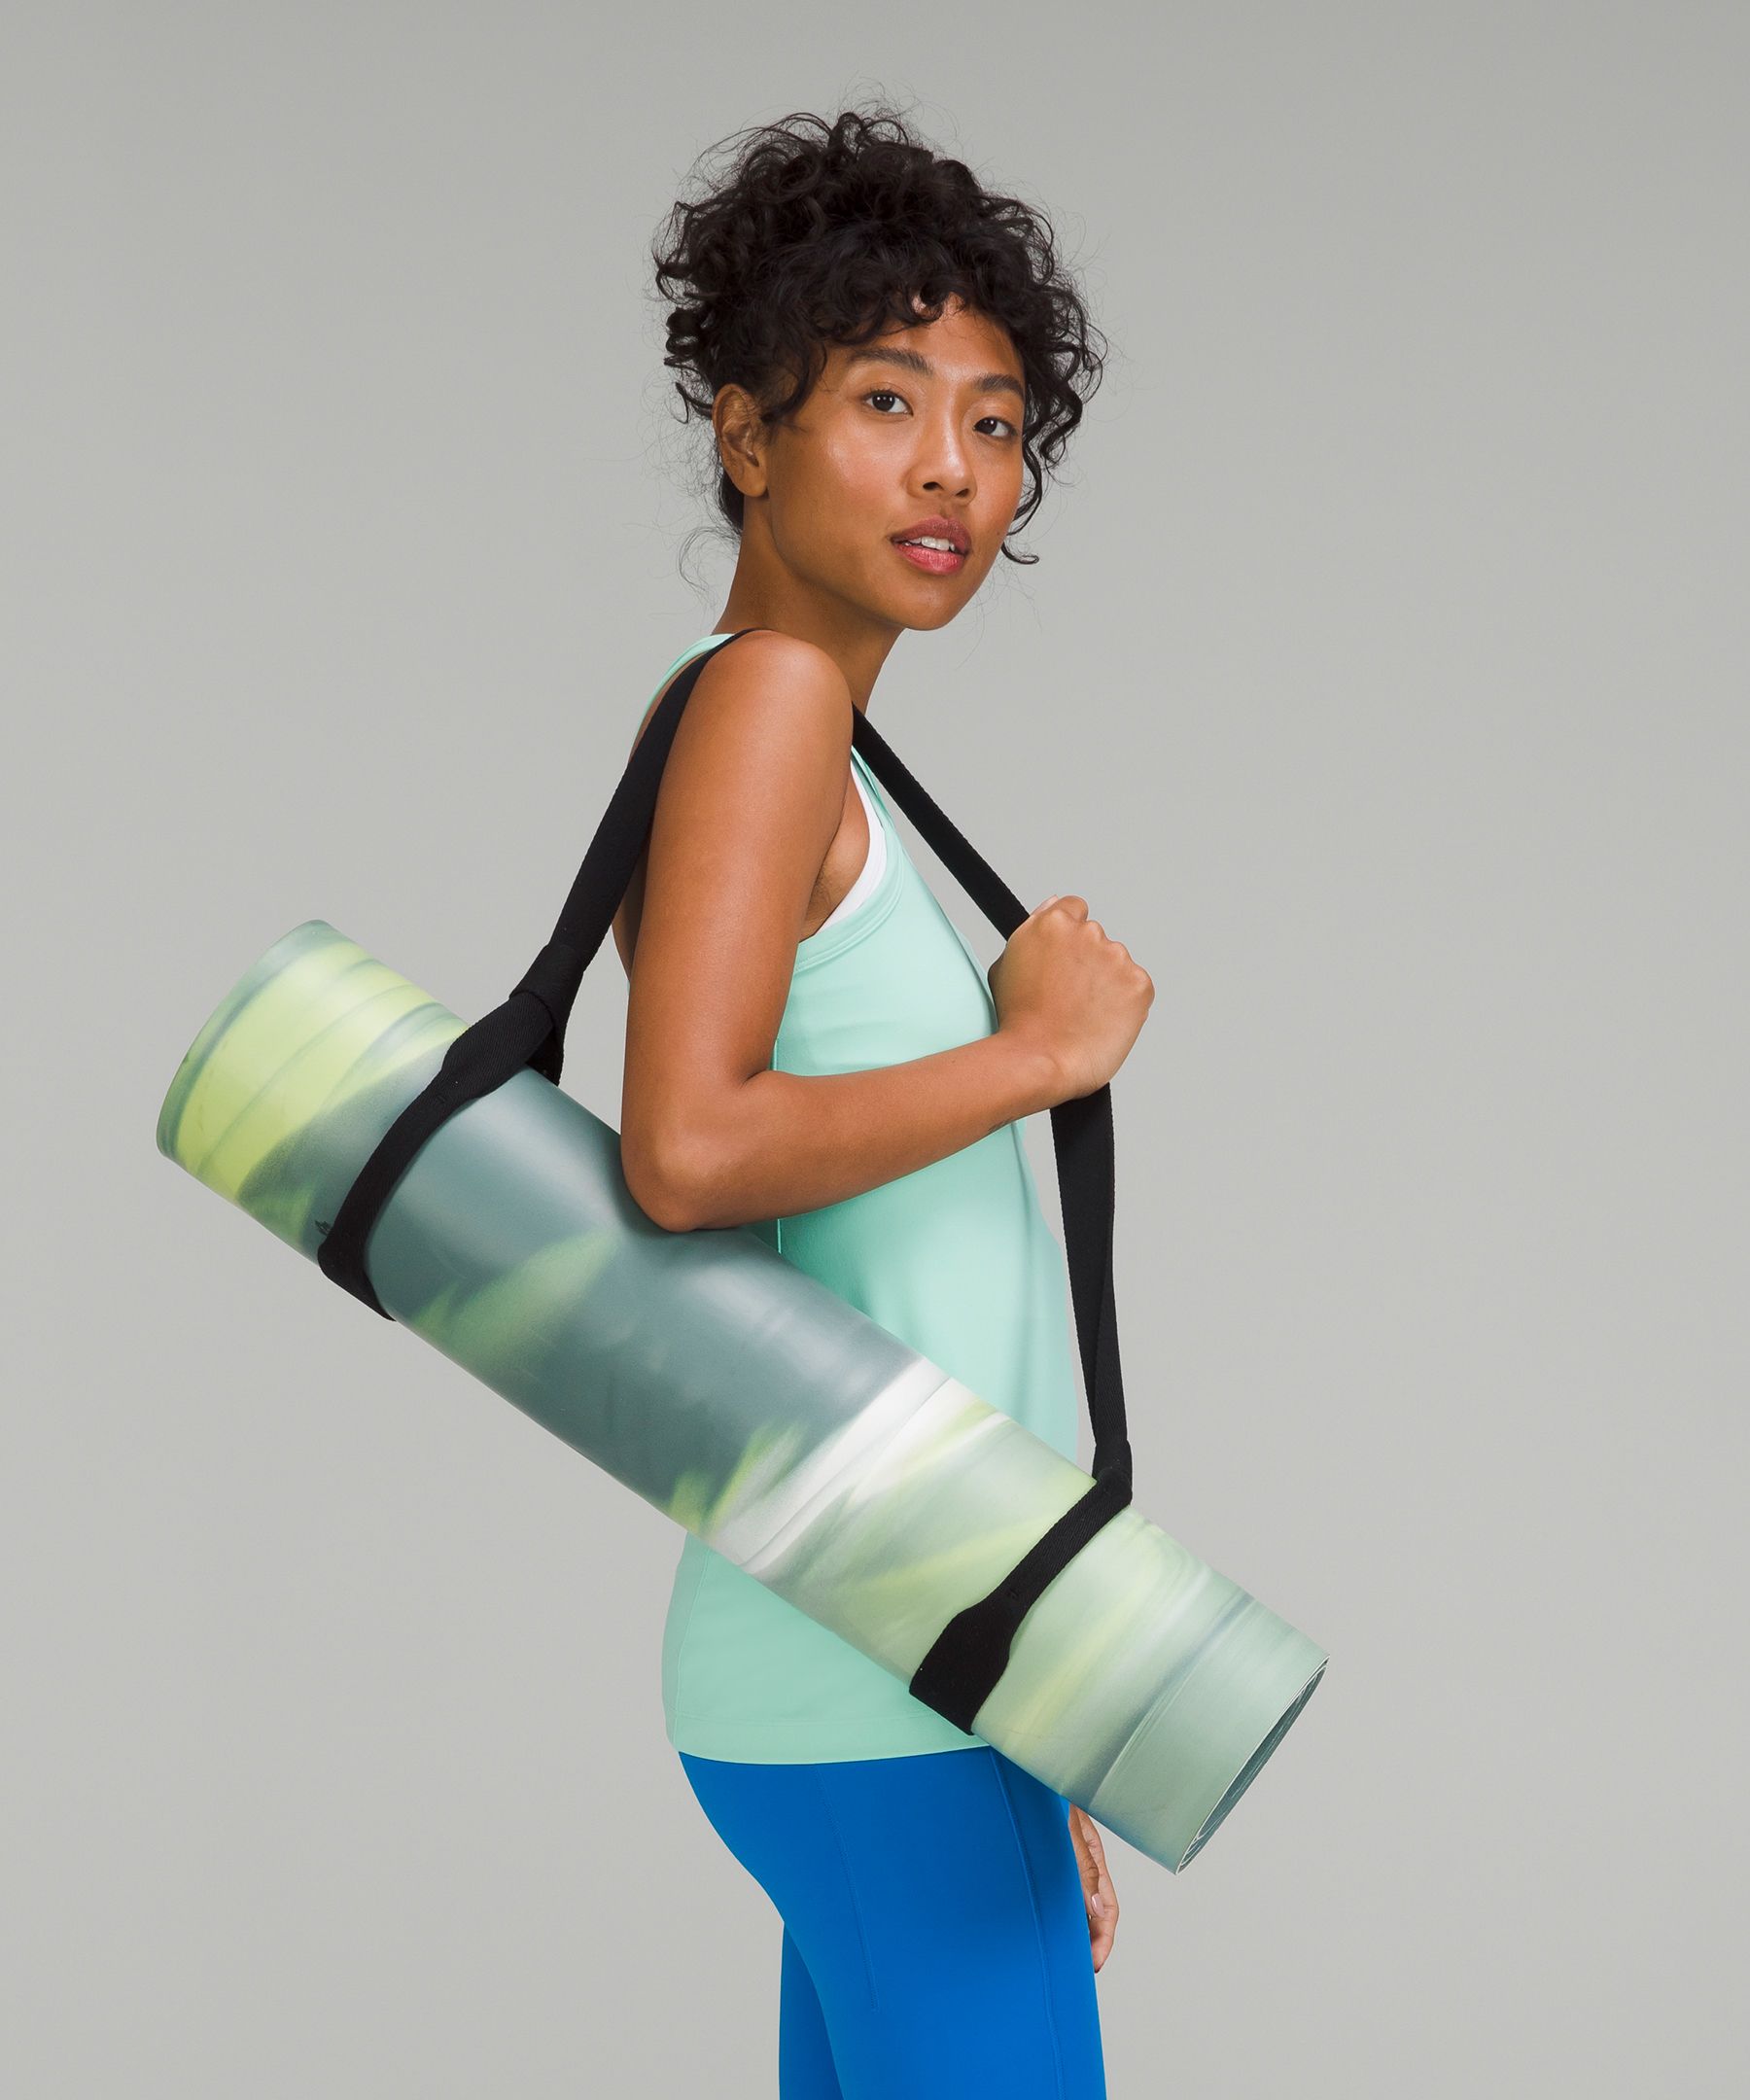 Loop it Up Mat Strap, Unisex Work Out Accessories